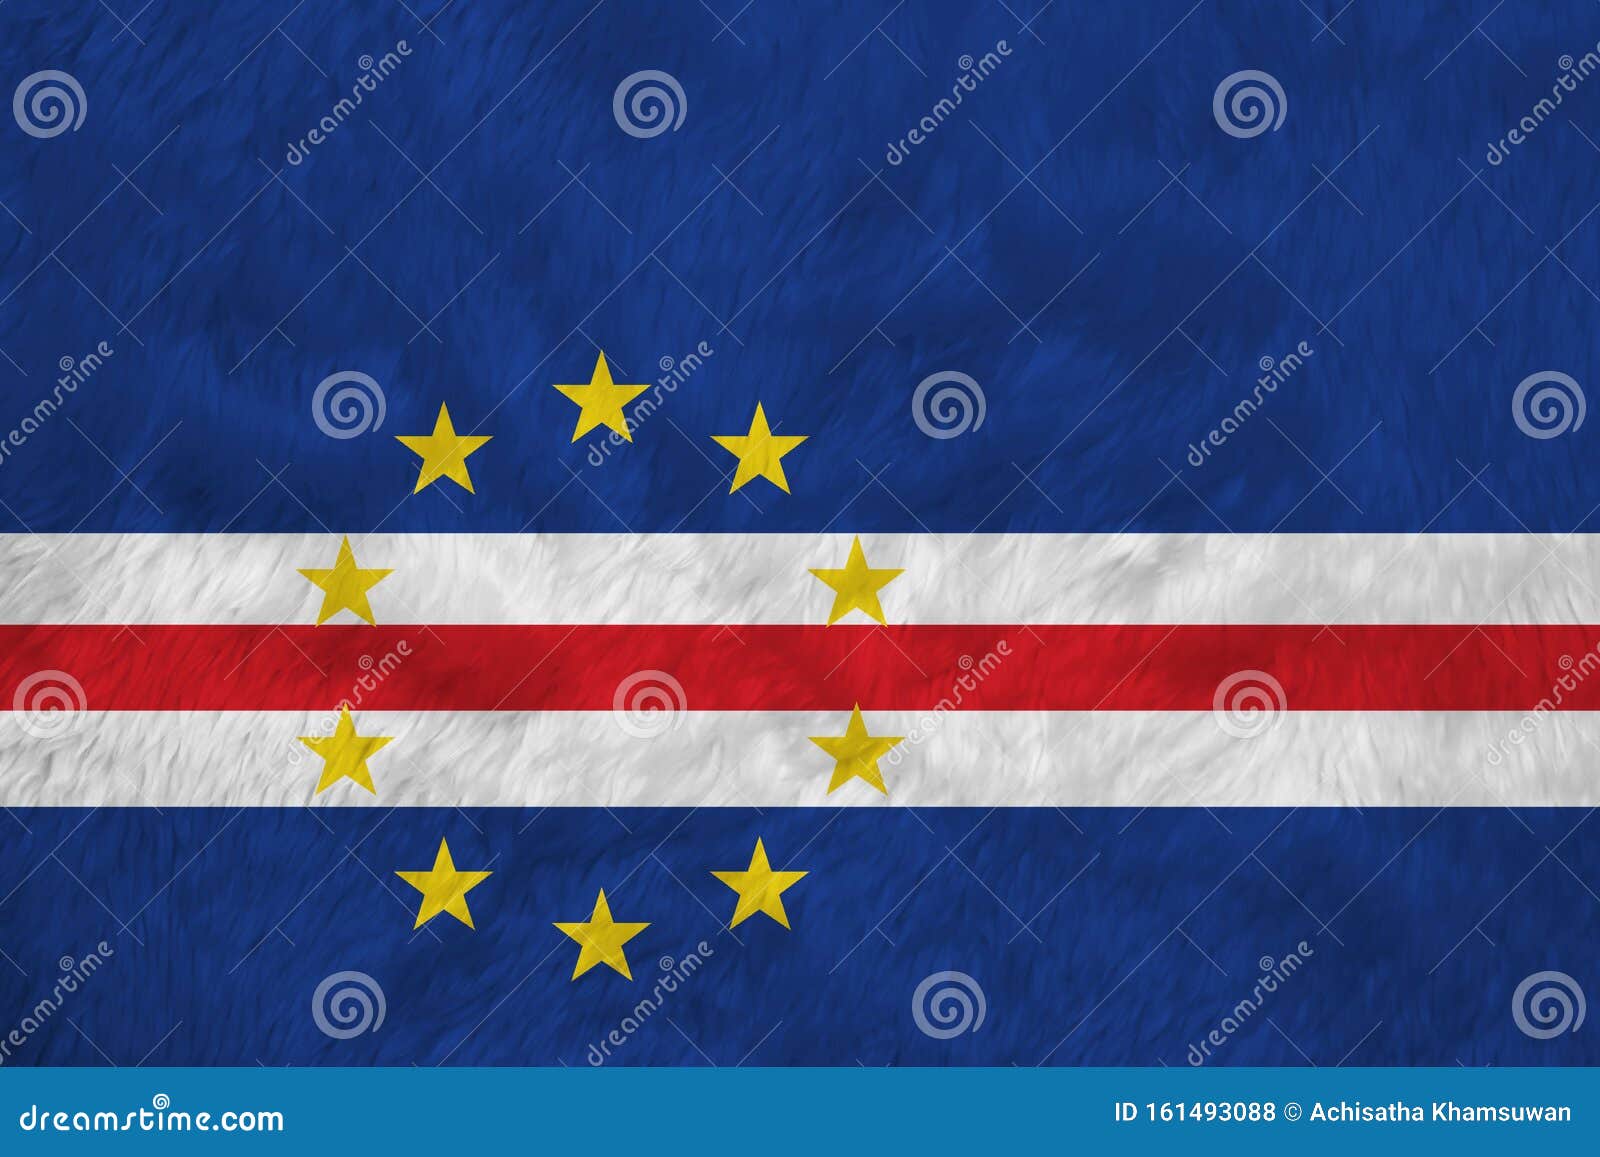 towel fabric pattern flag of cape verde, blue white and red color with the circle of ten star